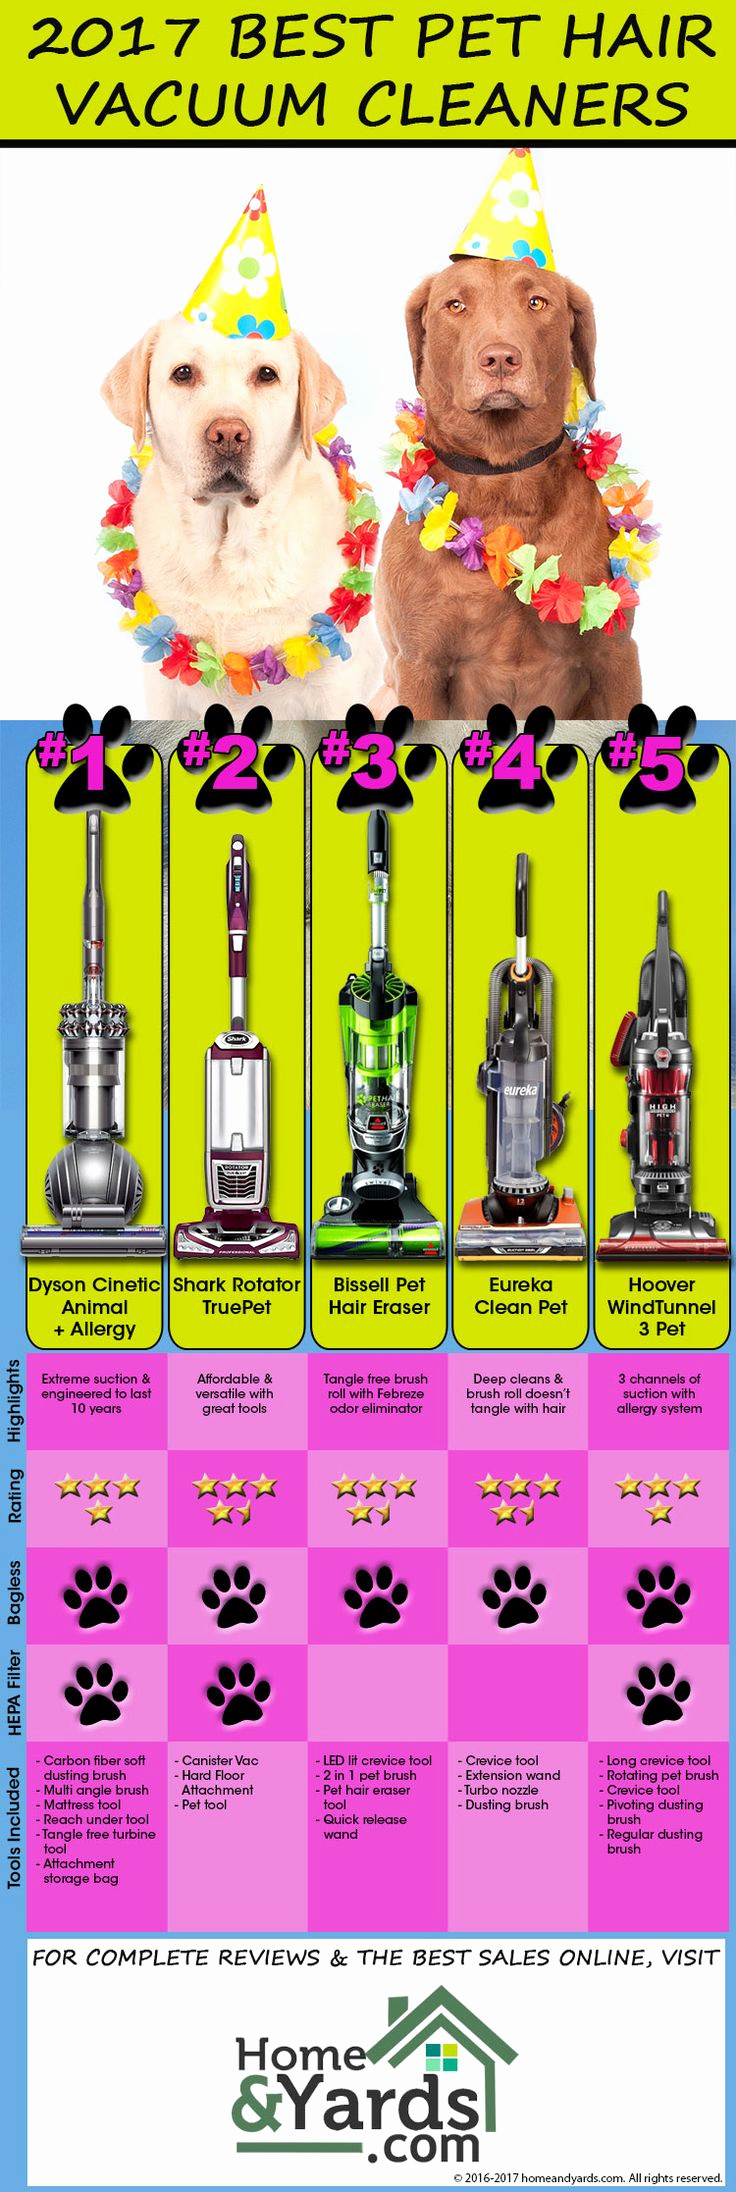 14 Fashionable Hardwood Floor Vacuum Reviews 2017 2024 free download hardwood floor vacuum reviews 2017 of best vacuum insulated bottles archives wlcu intended for best vacuum for hard floors and pet hair awesome 2017 best vacuum cleaners for pet hair